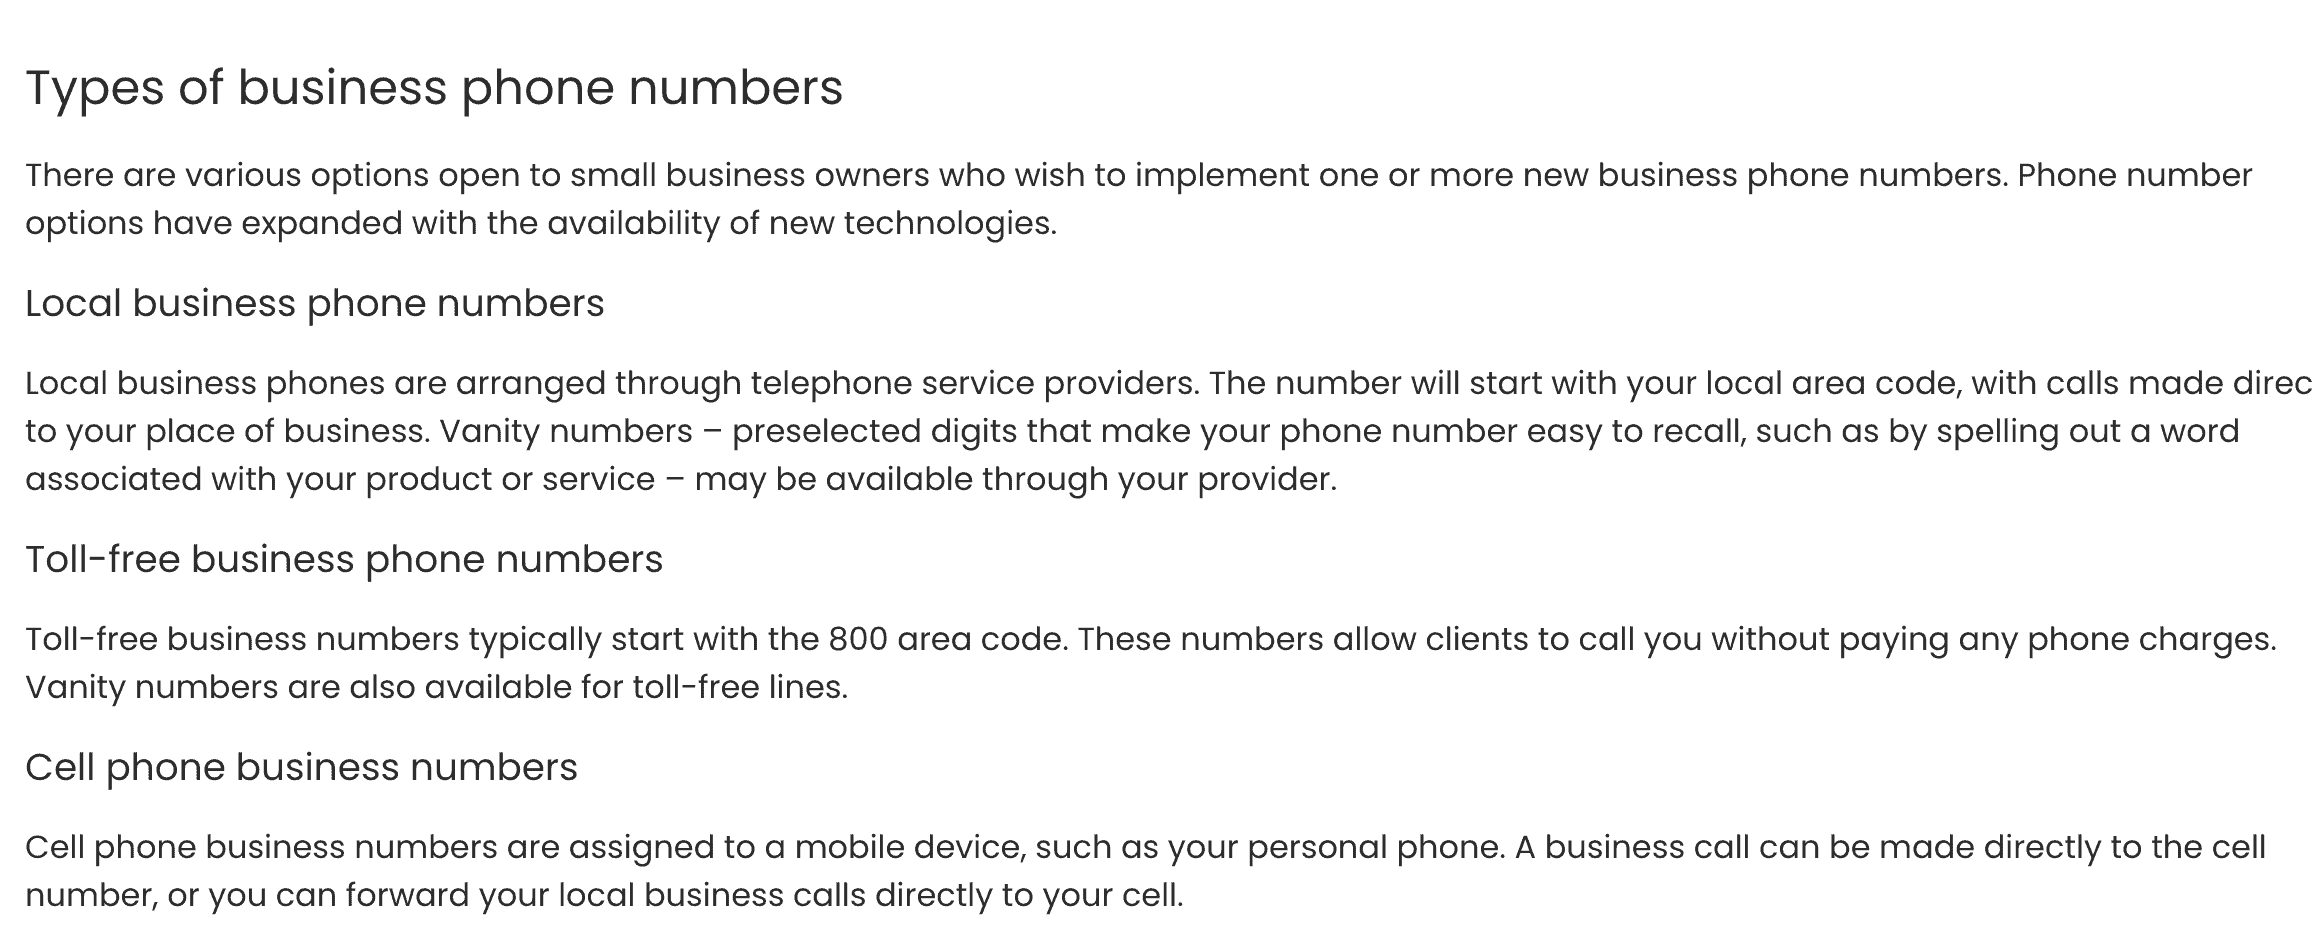 Types of Business phone numbers